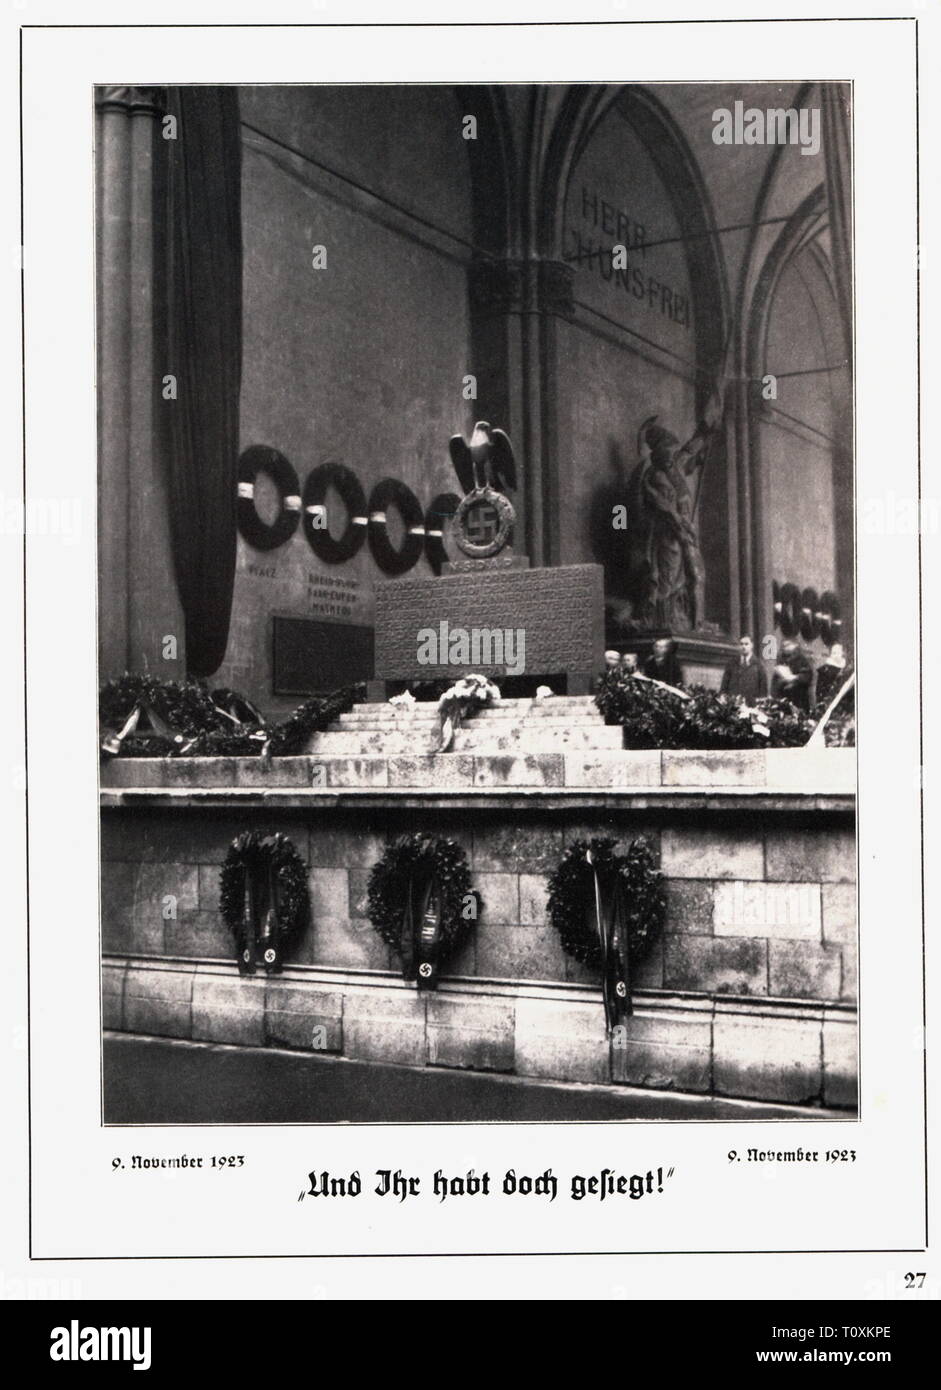 Nazism / National Socialism, propaganda, memorial plaque to commemorate the victims of the Beer Hall Putsch 9.11.1923, Feldherrnhalle (Field Marshals' Hall), Munich, view, 1934, 'March towards the Feldherrnhalle (Field Marshals' Hall)', November, wreath, chaplet, wreaths, chaplets, NS, National Socialism, Nazism, Bavaria, Germany, German Reich, Third Reich, 20th century, 1930s, memorial plaque, commemorative plaque, commemorative plaques, memory, memories, memoria, victim, victims, view, views, historic, historical, Additional-Rights-Clearance-Info-Not-Available Stock Photo